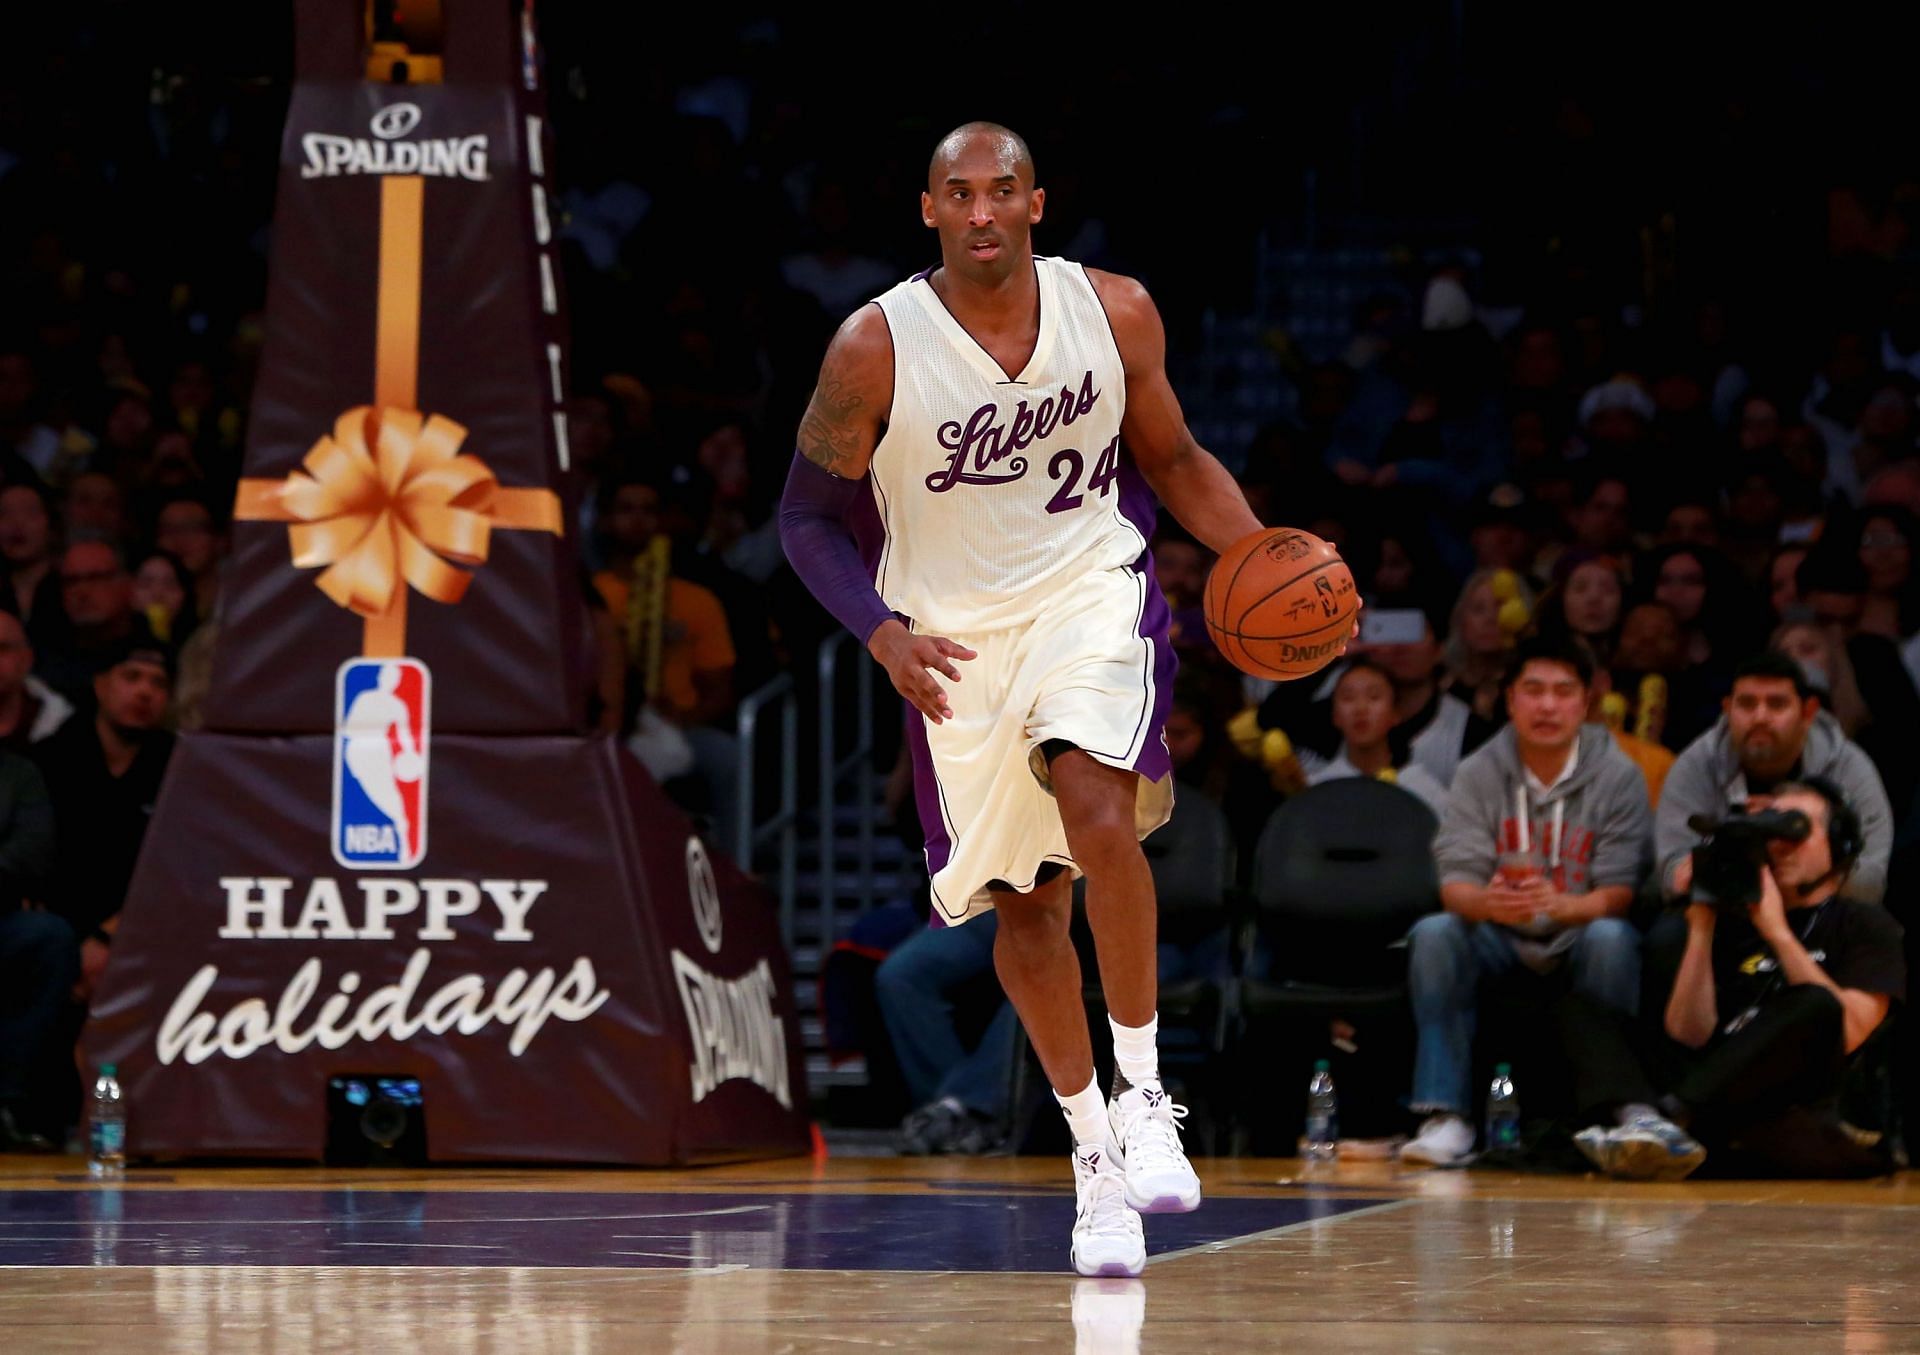 Kobe Bryant playing while wearing the 2015 Christmas jersey